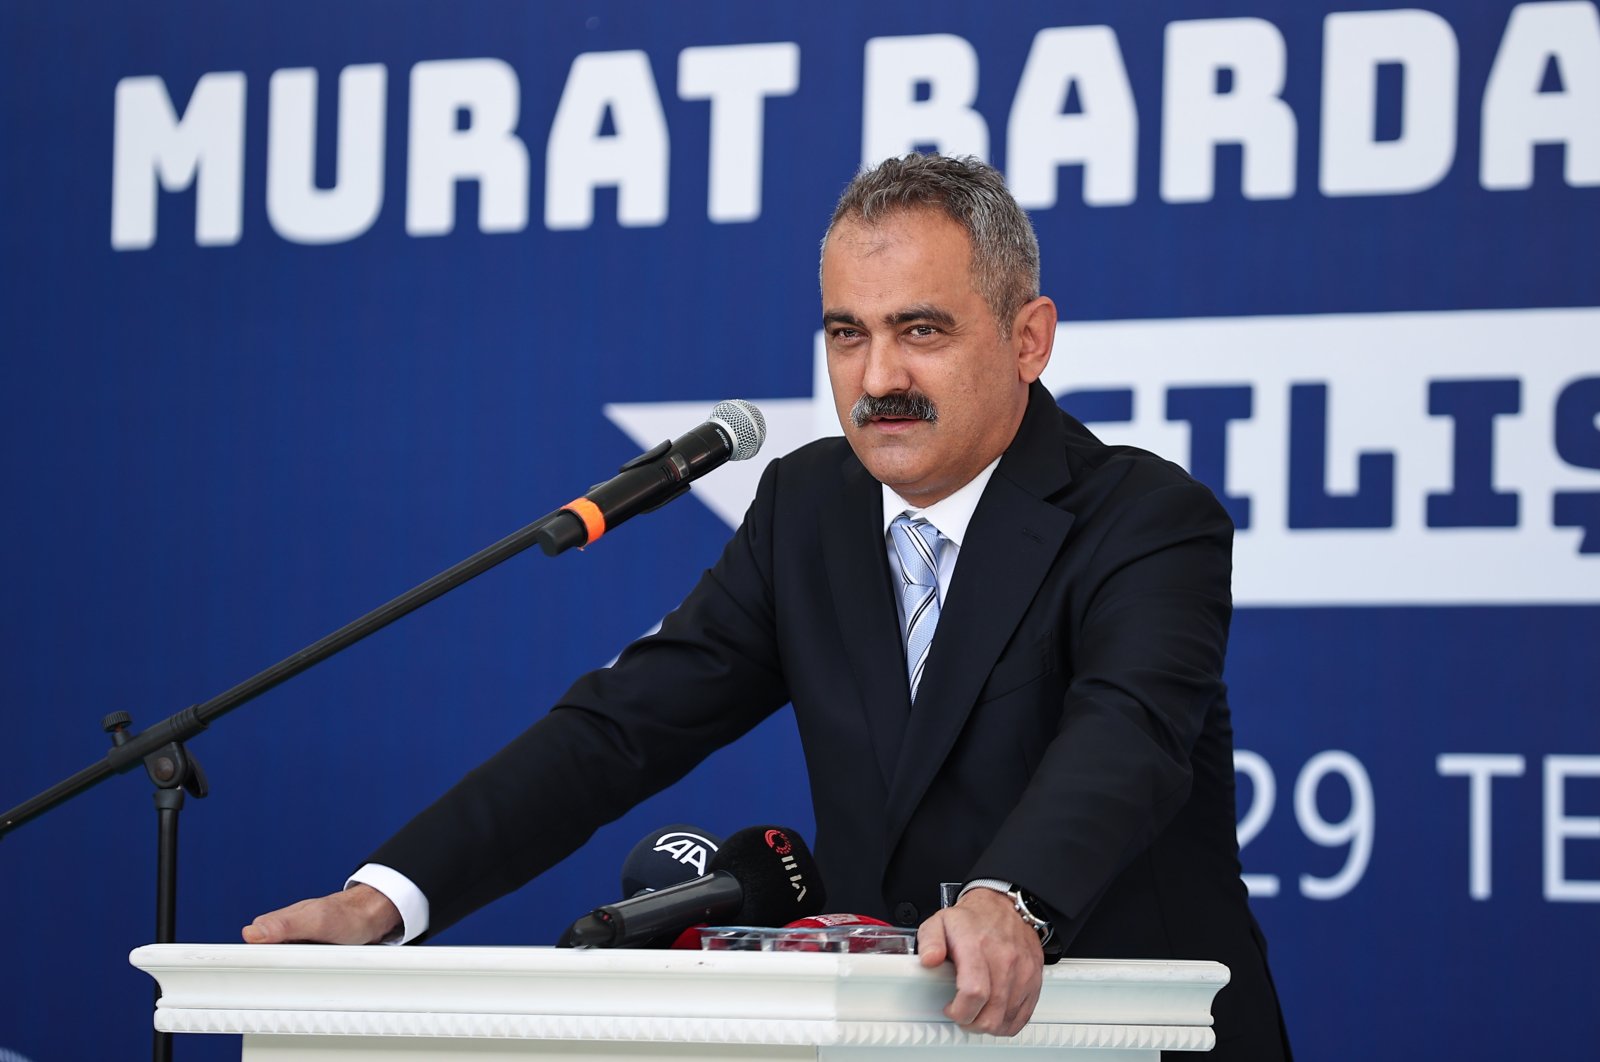 Education Minister Mahmut Özer speaks at an opening ceremony of a library in Istanbul, Turkey, July 29, 2022. (AA Photo)